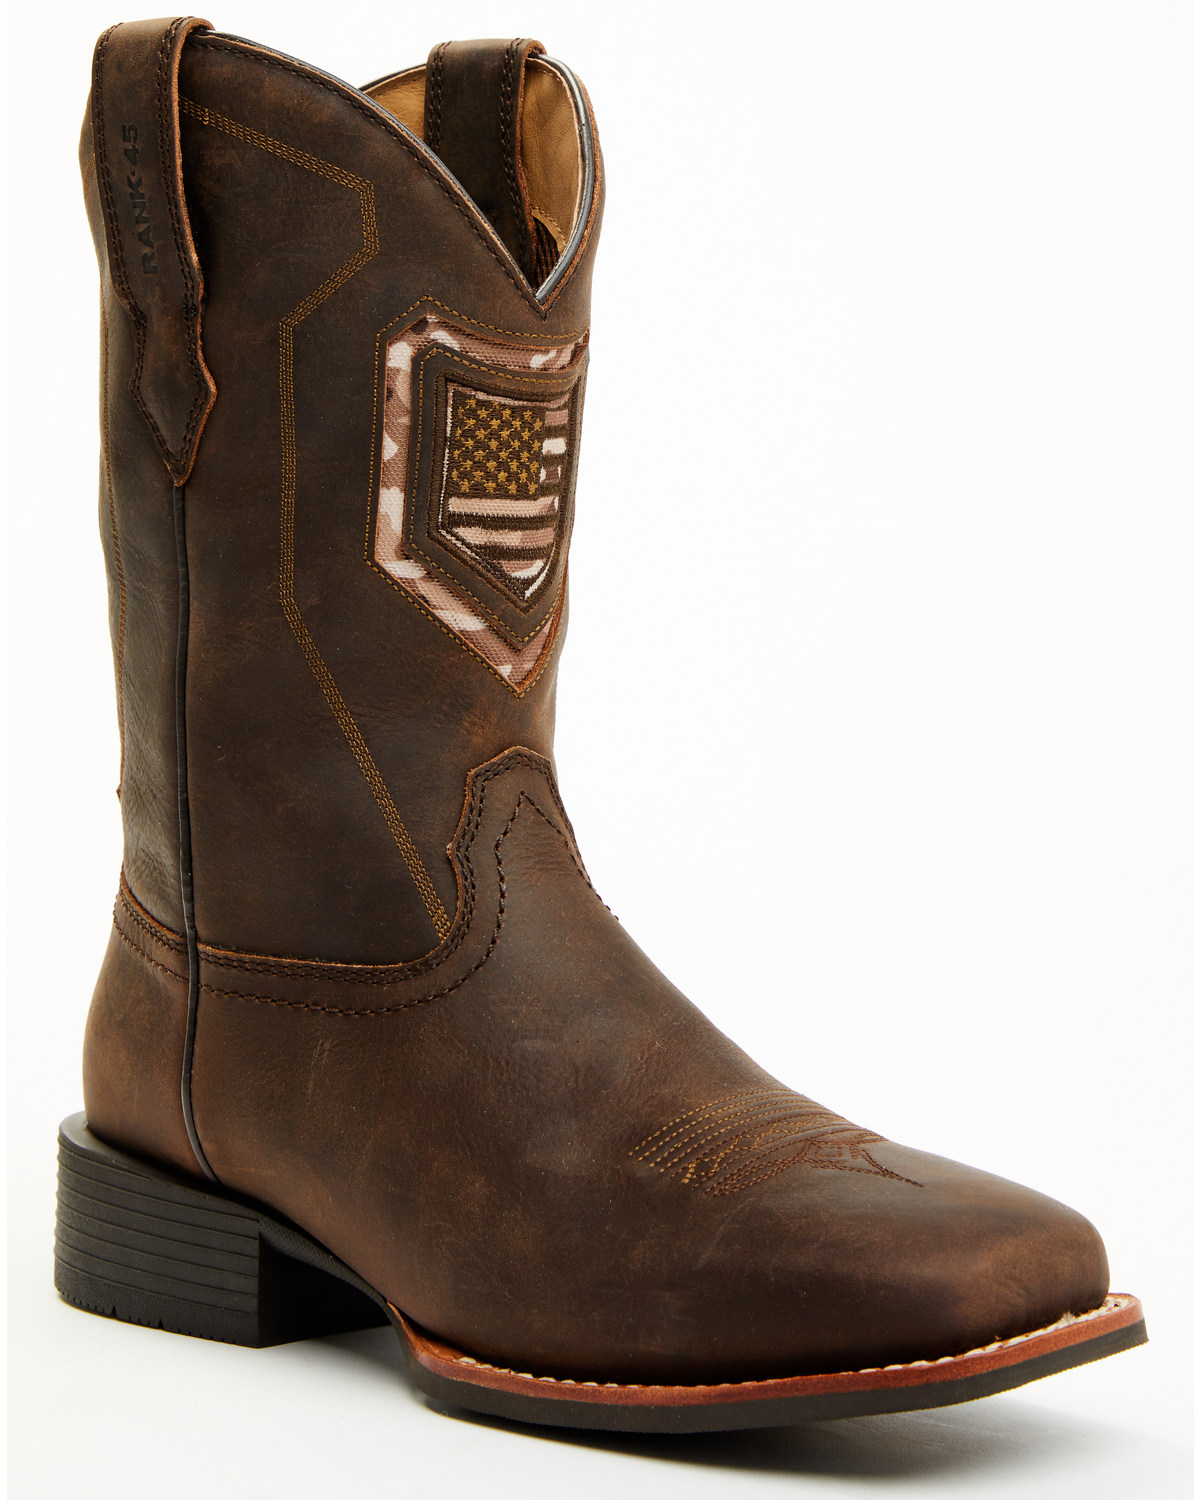 RANK 45® Men's Chief Western Performance Boots - Broad Square Toe